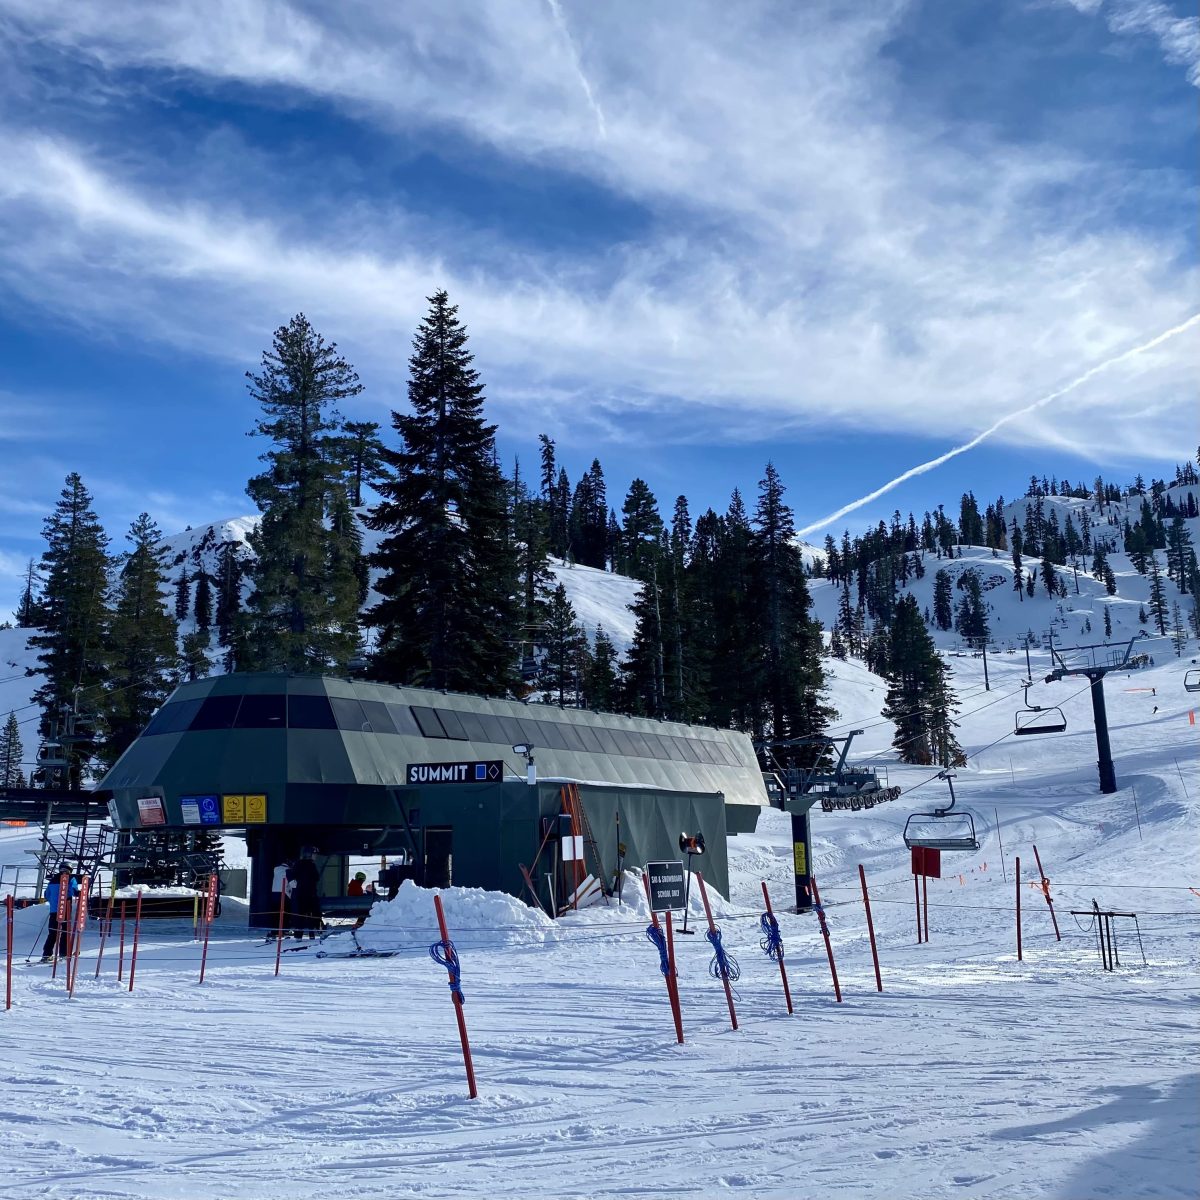 No lift line for Summit Express at Alpine Meadows